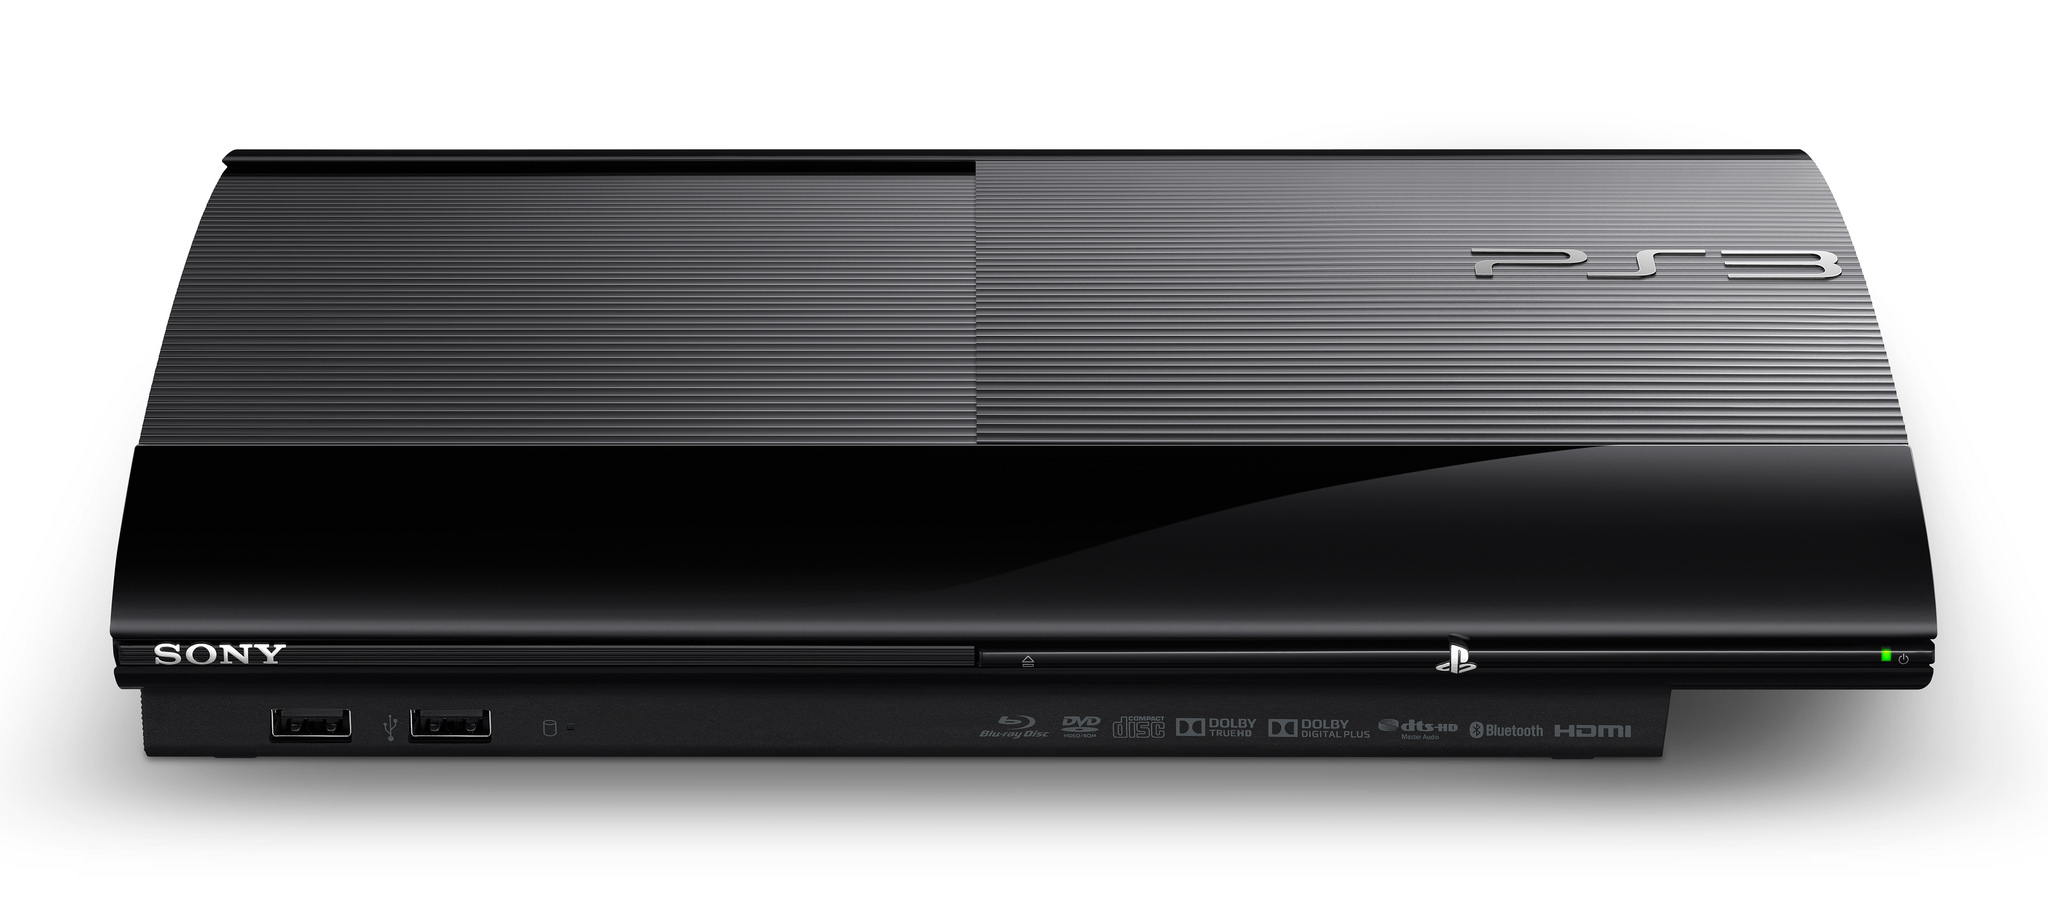 Sony Introduces an Even Slimmer PS3 Available for the Holidays